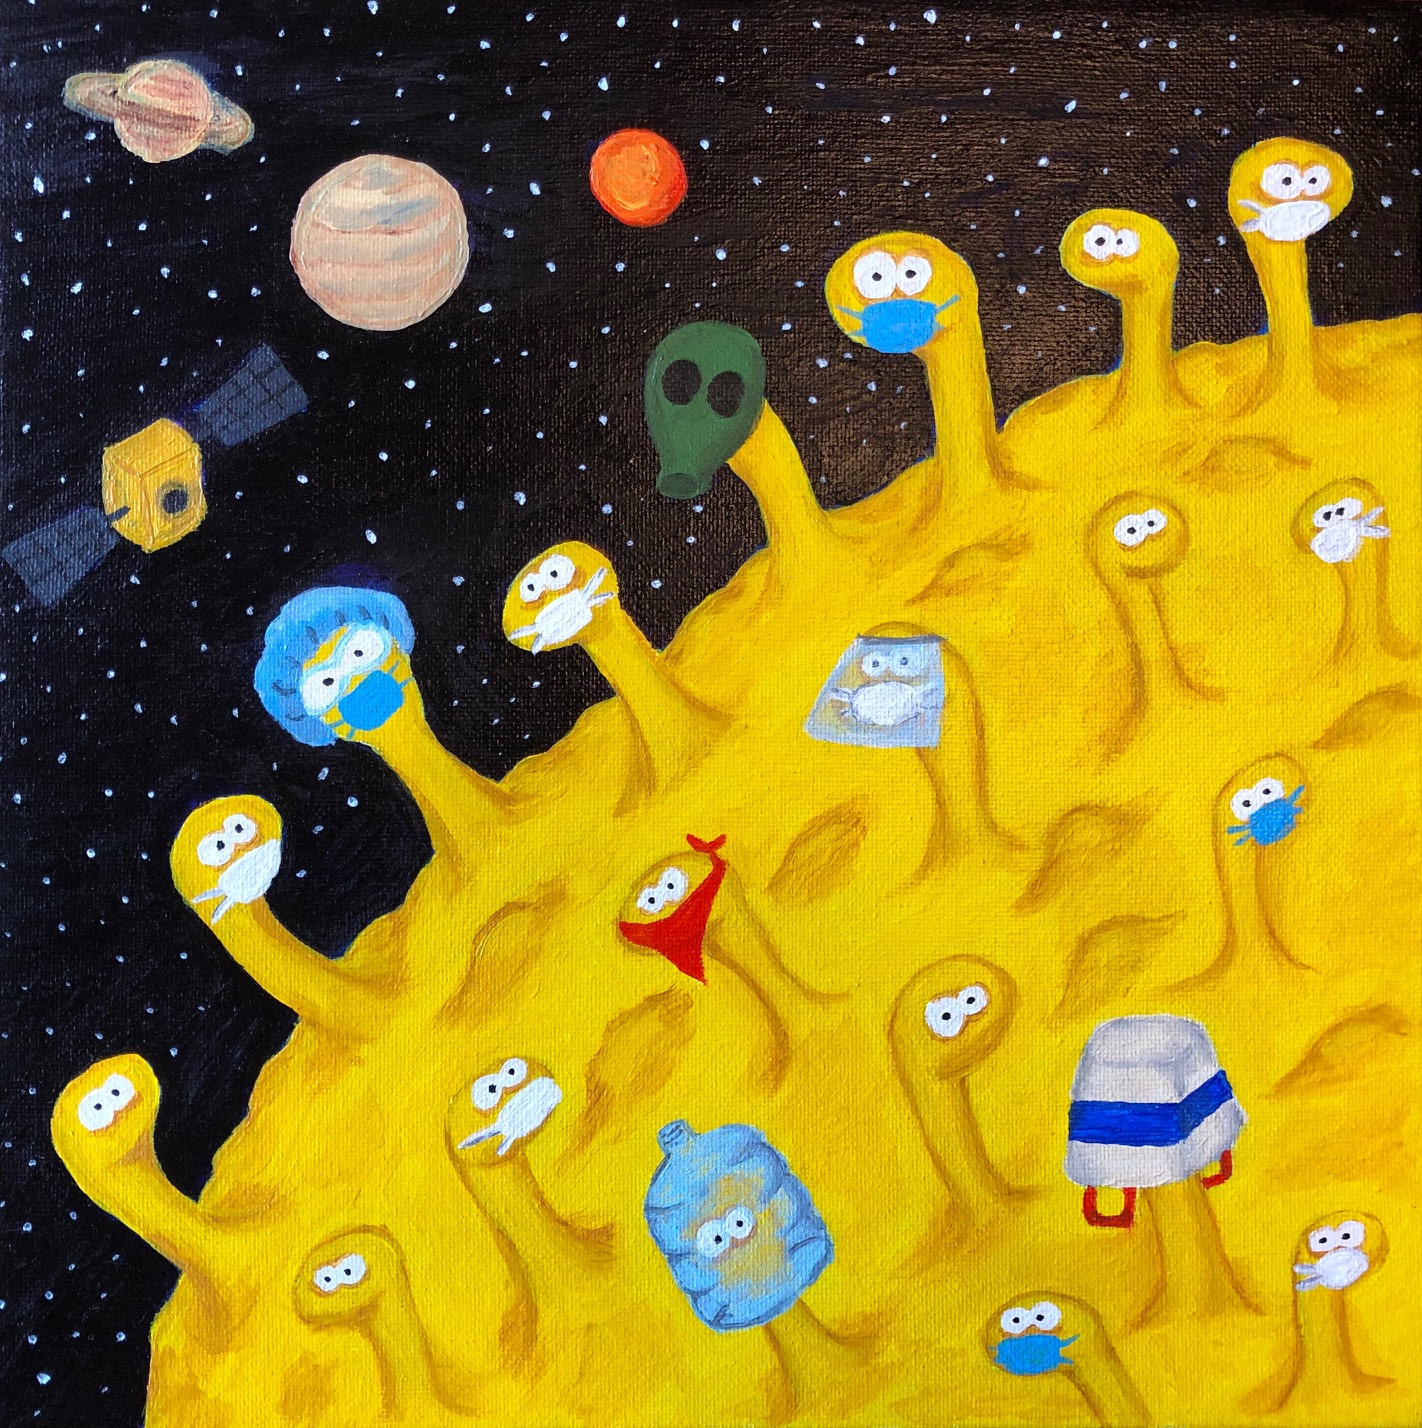 Painting of large yellow virus cell-like structure containing eyes on exterior in space with planets and satellite